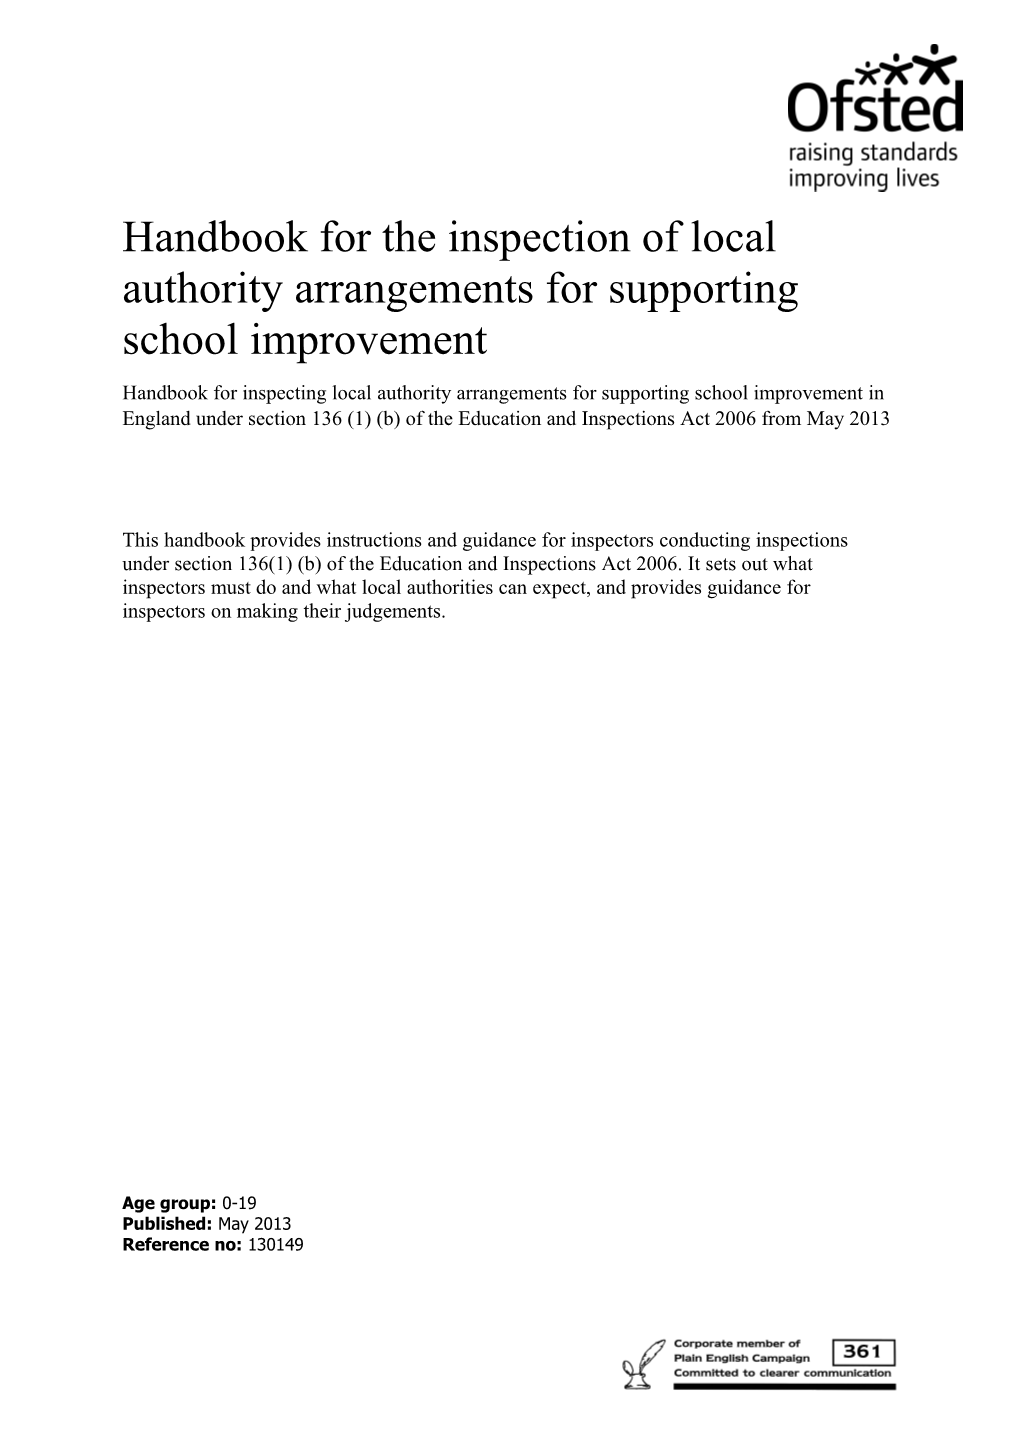 Handbook for the Inspection of Local Authority Arrangements for Supporting School Improvement